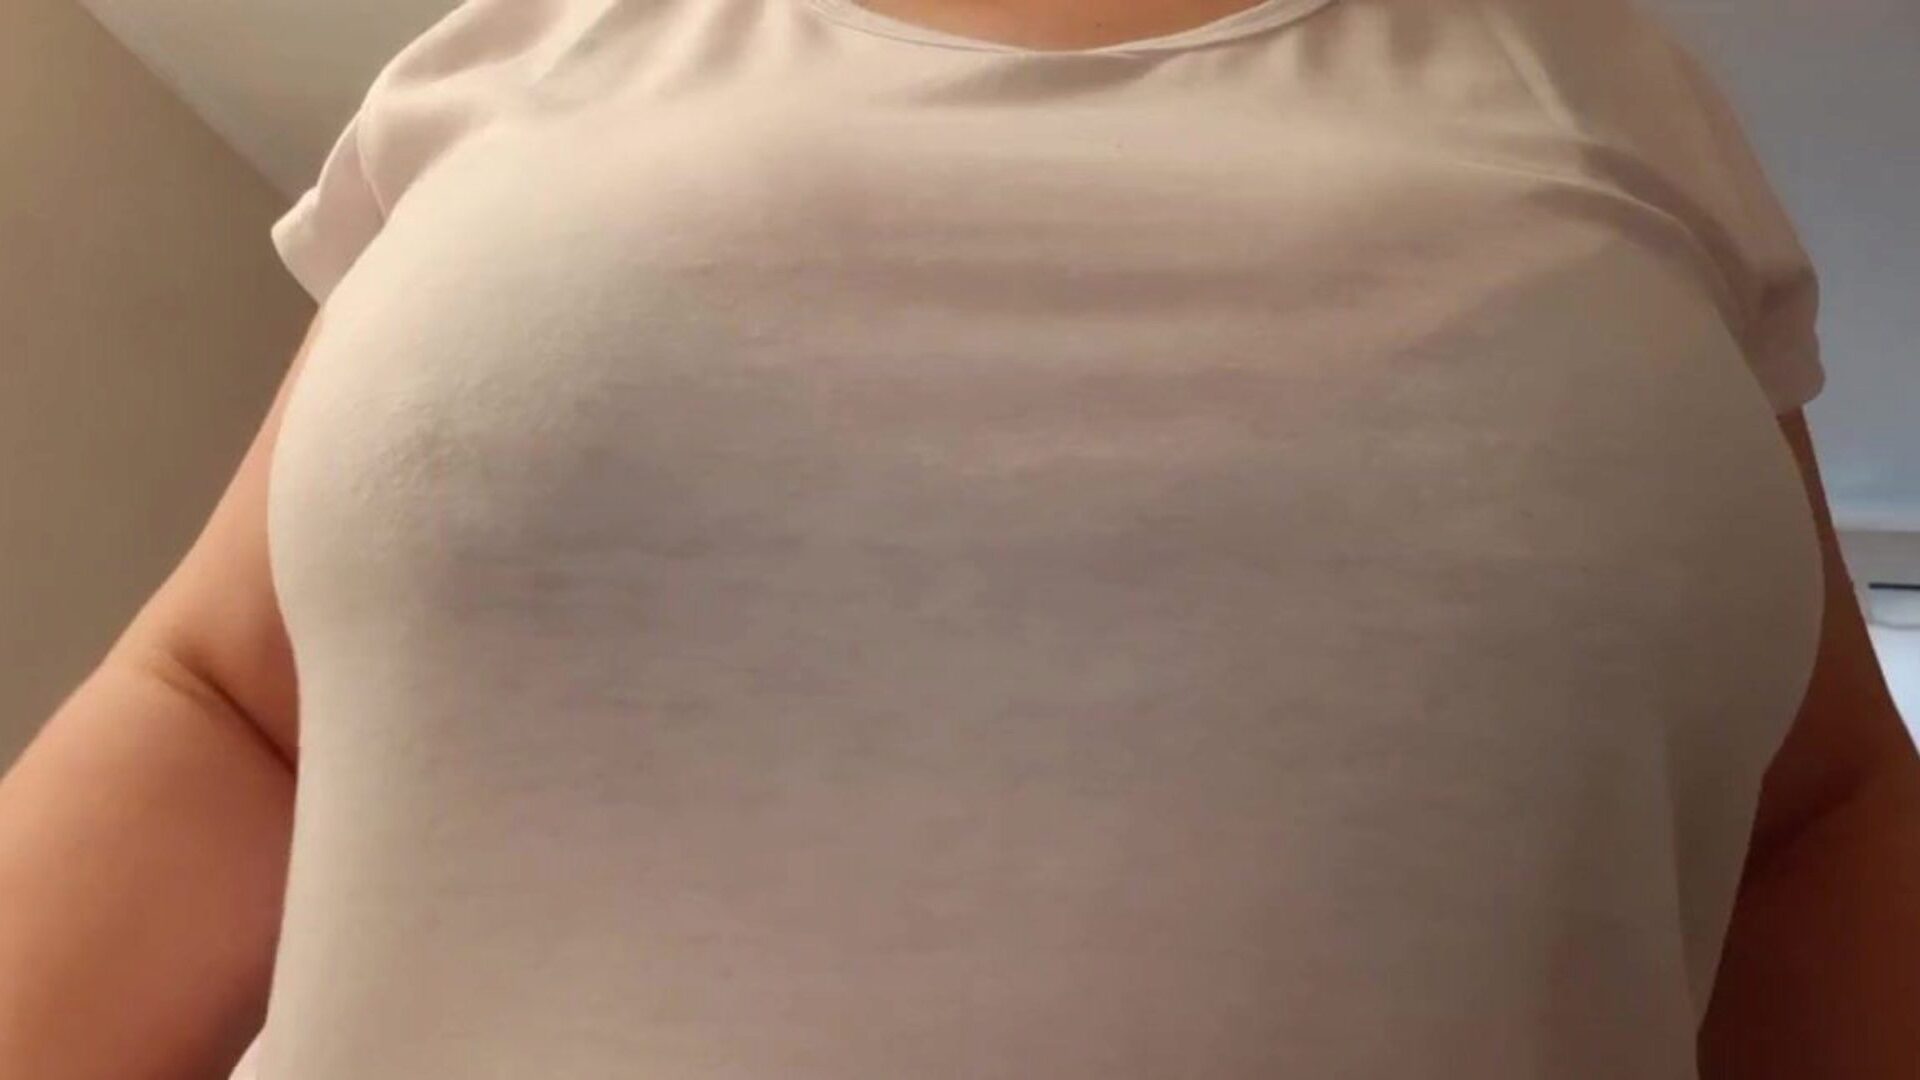 Horny Slut Wife toying with her giant titties Horny Marie in the morning ... awaiting that someone will have fun with her huge mambos